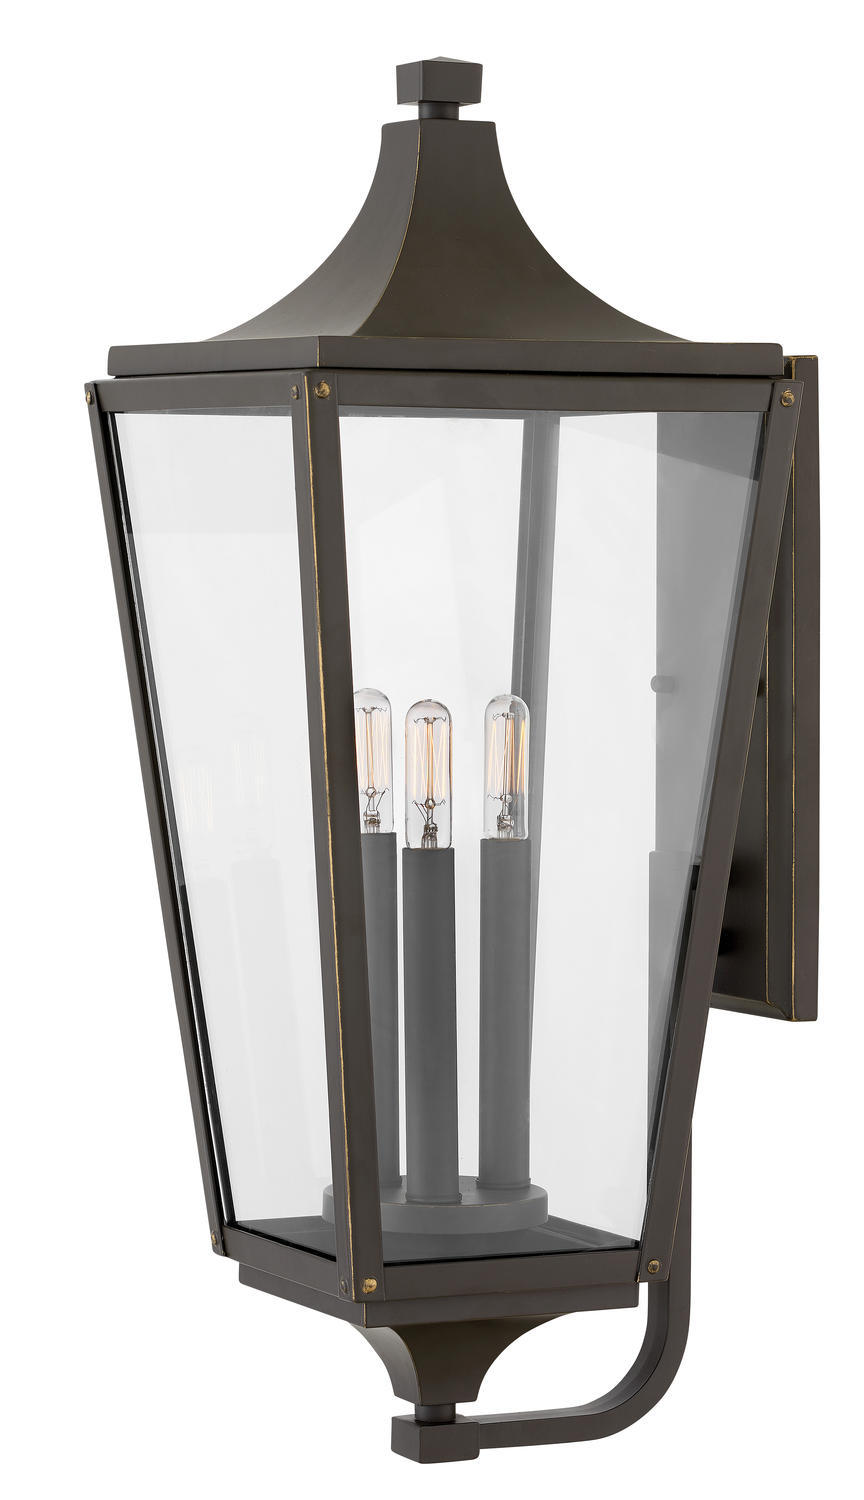 Hinkley Jaymes 1295 Outdoor Wall Sconce